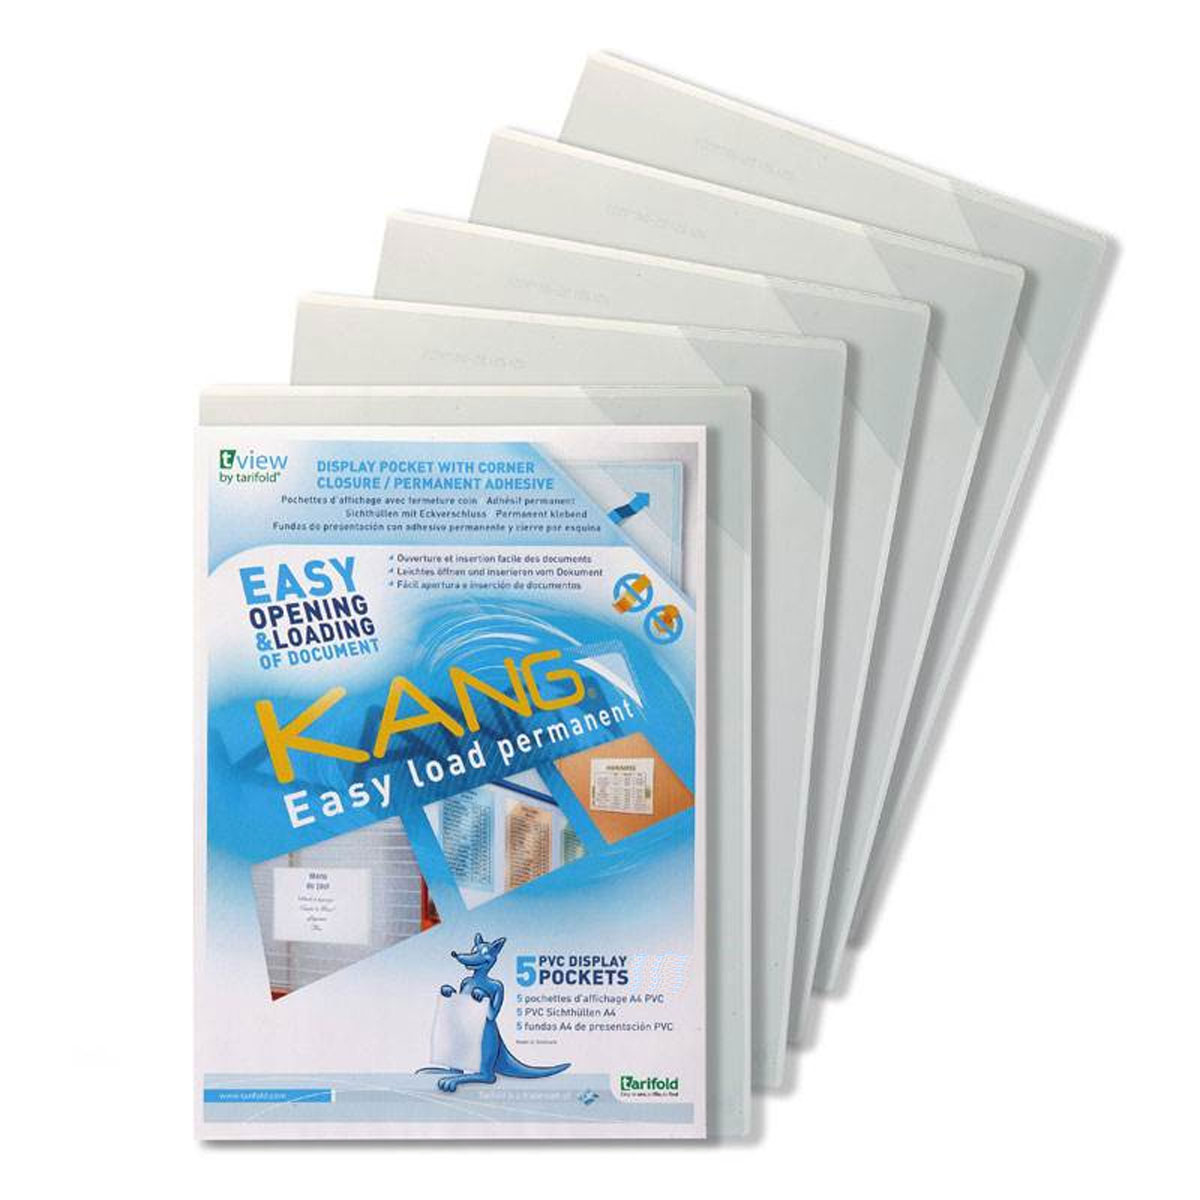 P194684 8.5 X 11 In. Easy Load Permanent Adhesive Pocket With Corner Closure, White - Pack Of 5